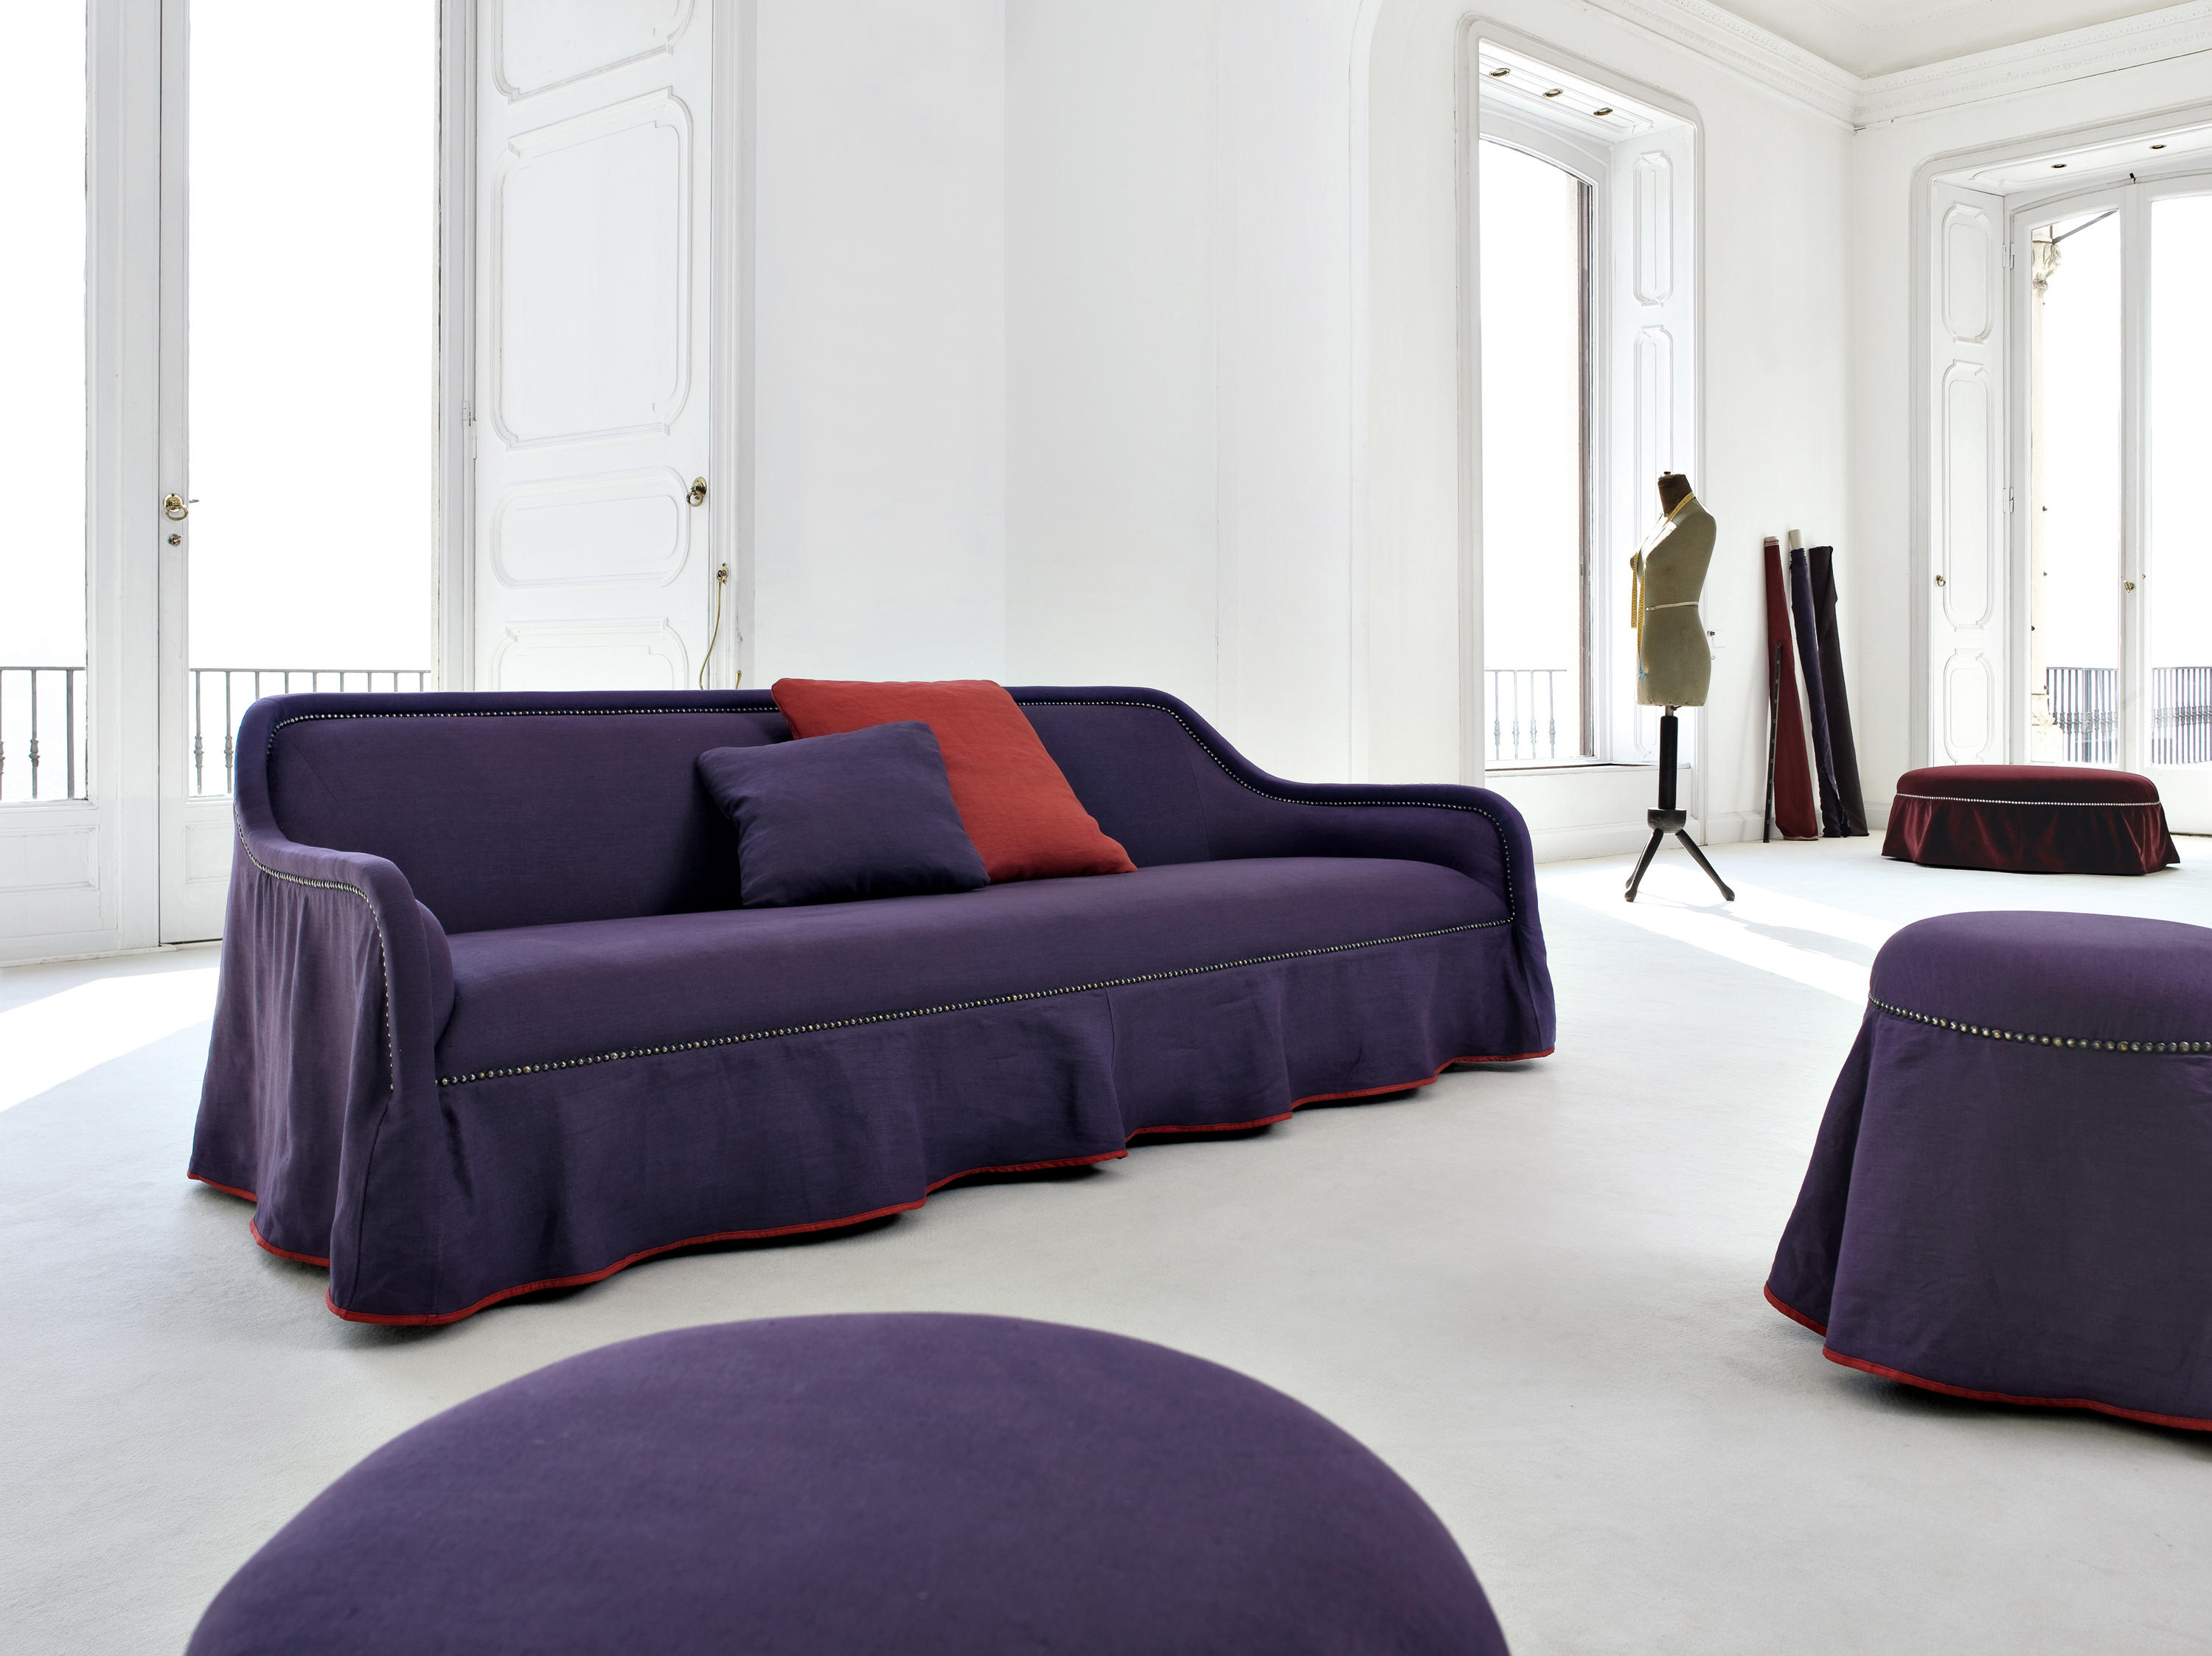 ARPÈGE - Sofas from Busnelli | Architonic